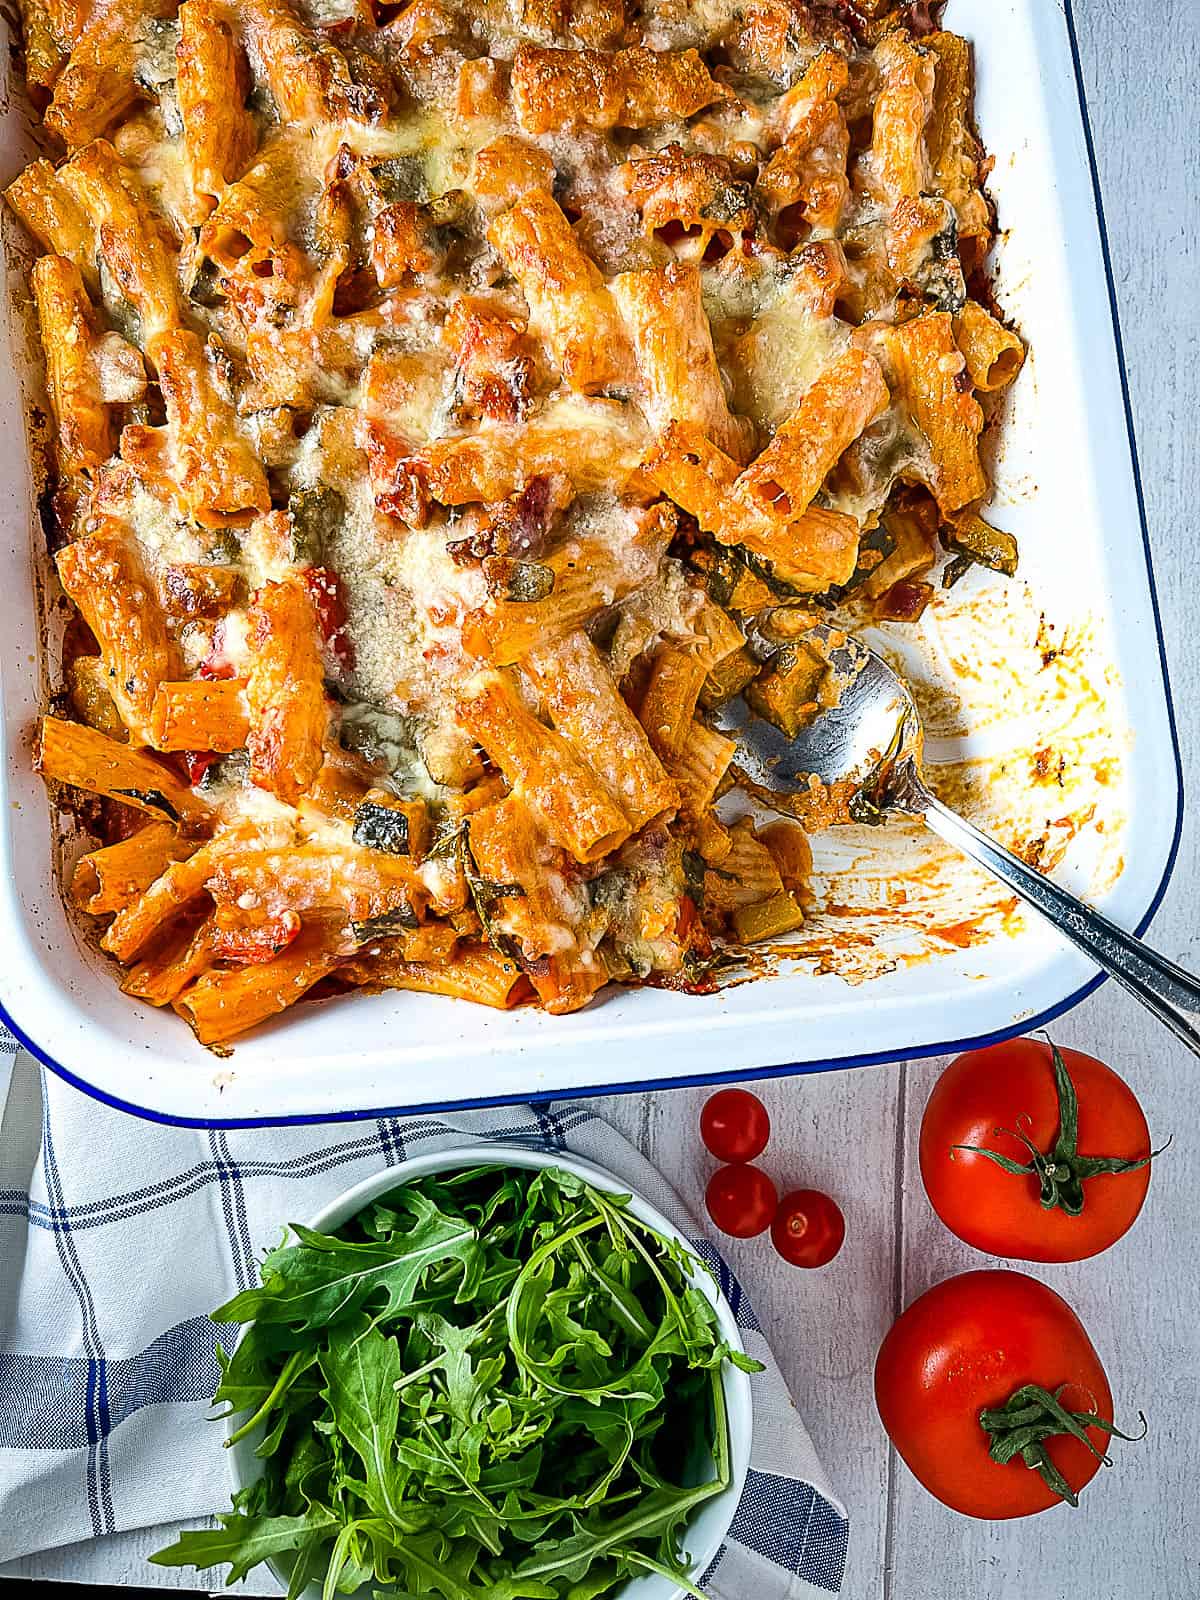 vegetable and pesto pasta bake in dish with portion removed and side green salad and fresh tomatoes